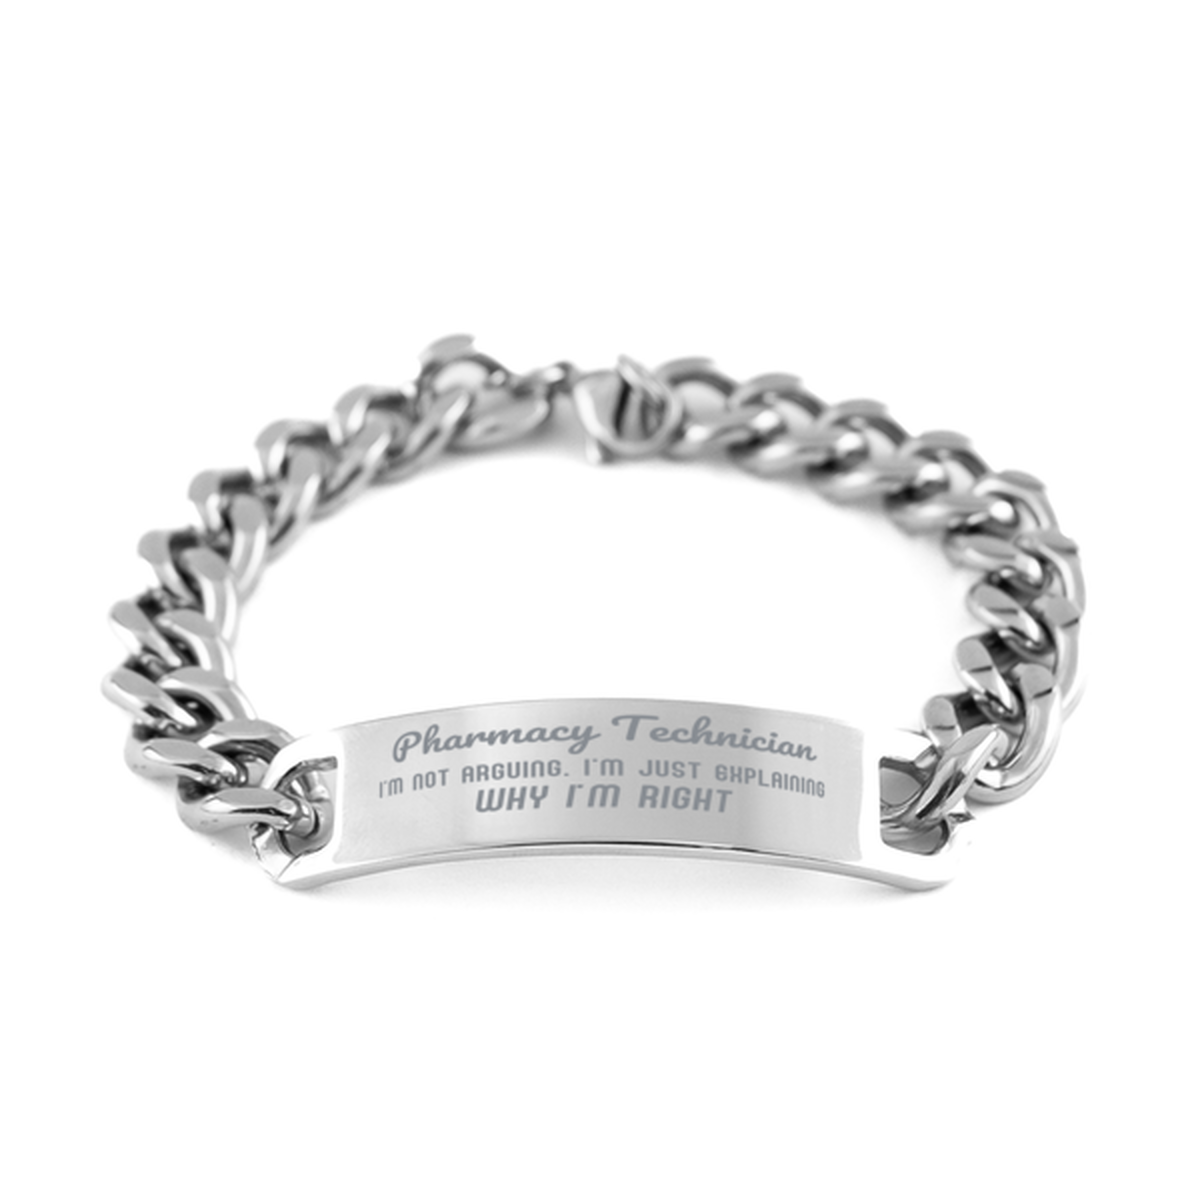 Pharmacy Technician I'm not Arguing. I'm Just Explaining Why I'm RIGHT Cuban Chain Stainless Steel Bracelet, Graduation Birthday Christmas Pharmacy Technician Gifts For Pharmacy Technician Funny Saying Quote Present for Men Women Coworker